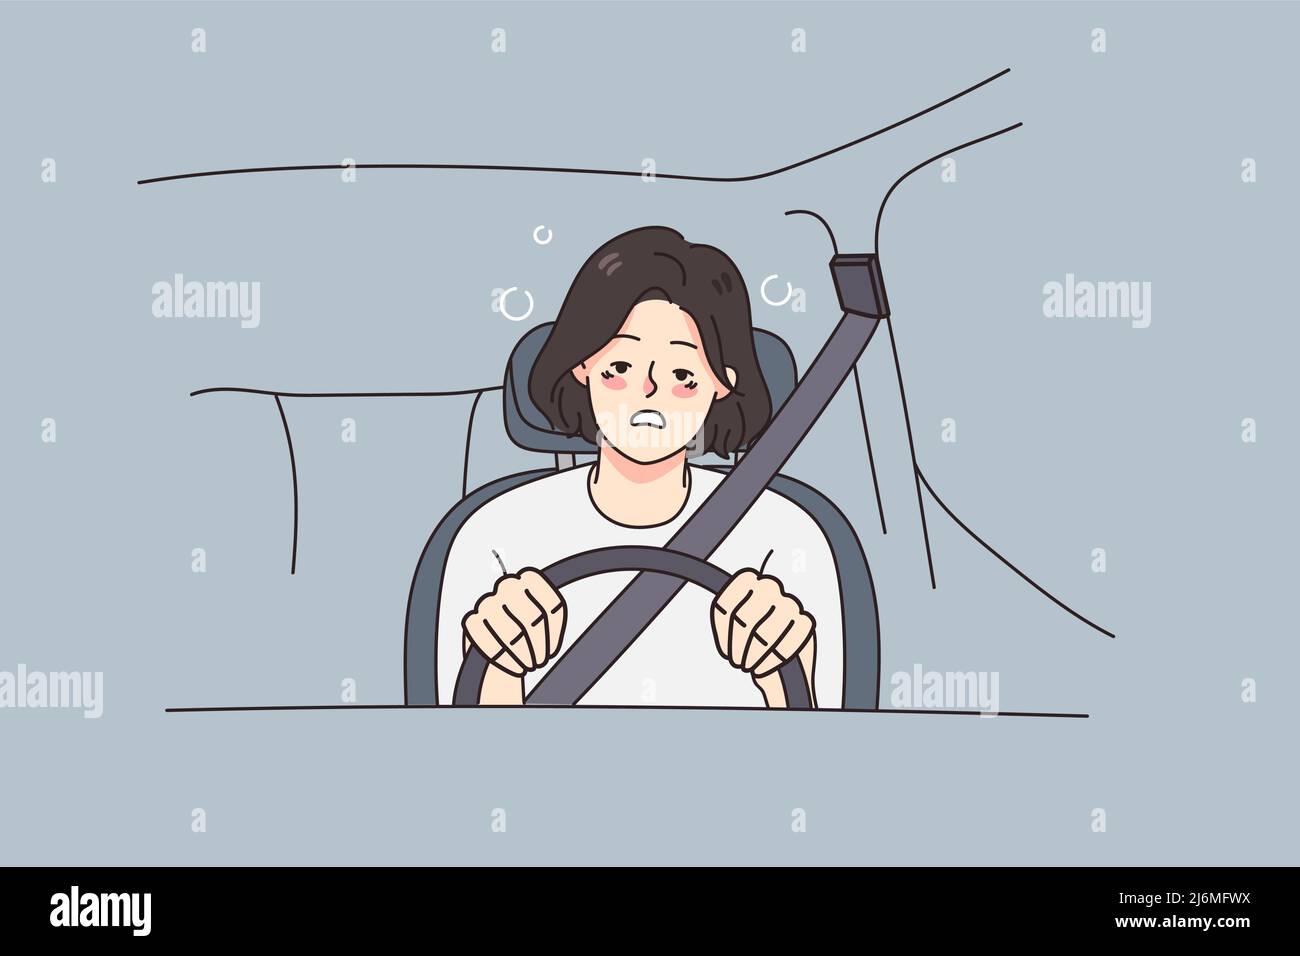 Tired young woman driving car feeling unwell suffer from health problems. Exhausted female driver struggle with depression or burnout, have physical or mental issues. Vector illustration.  Stock Vector